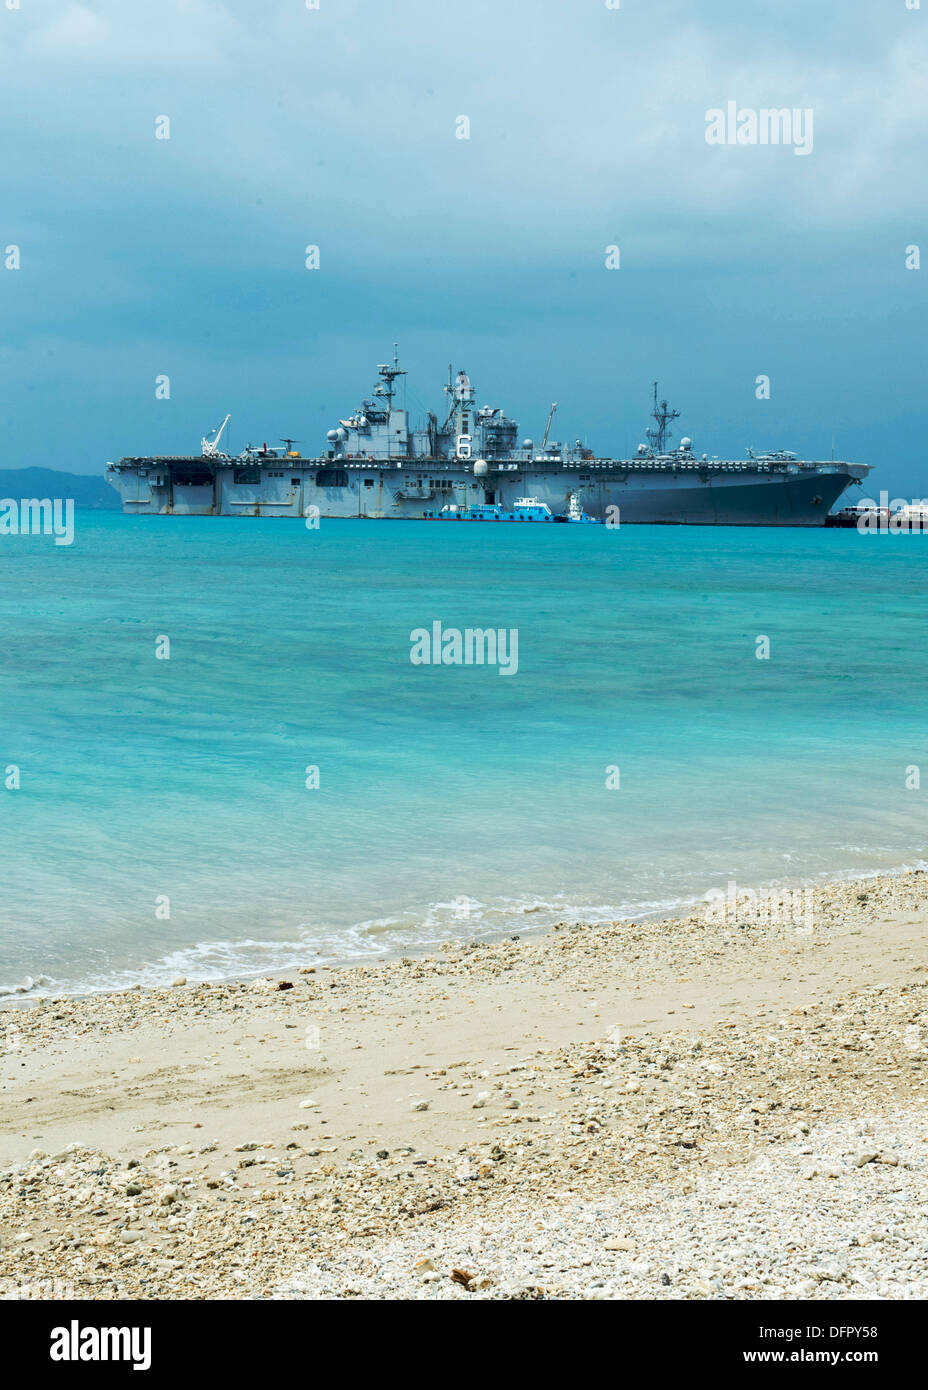 Amphibious assault ship USS Bonhomme Richard (LHD 6) is moored in White Beach Okinawa, during a scheduled port visit. Bonhomme Richard is the flagship of the Bonhomme Richard Amphibious Ready Group and is currently conducting routine operations in the U.S Stock Photo